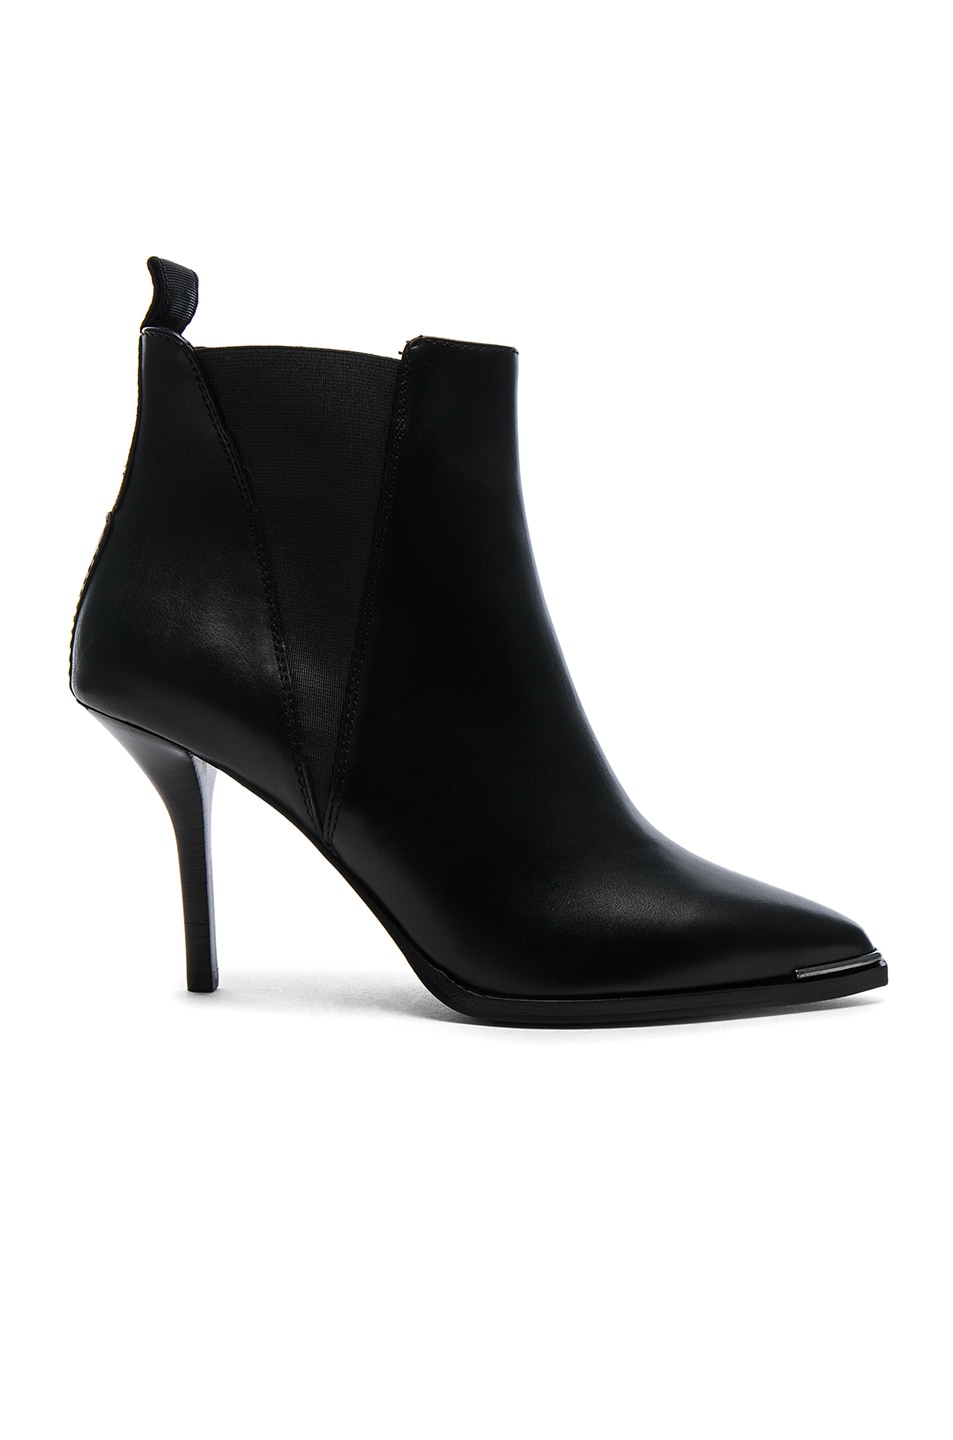 Image 1 of Acne Studios Leather Jemma Booties in Black